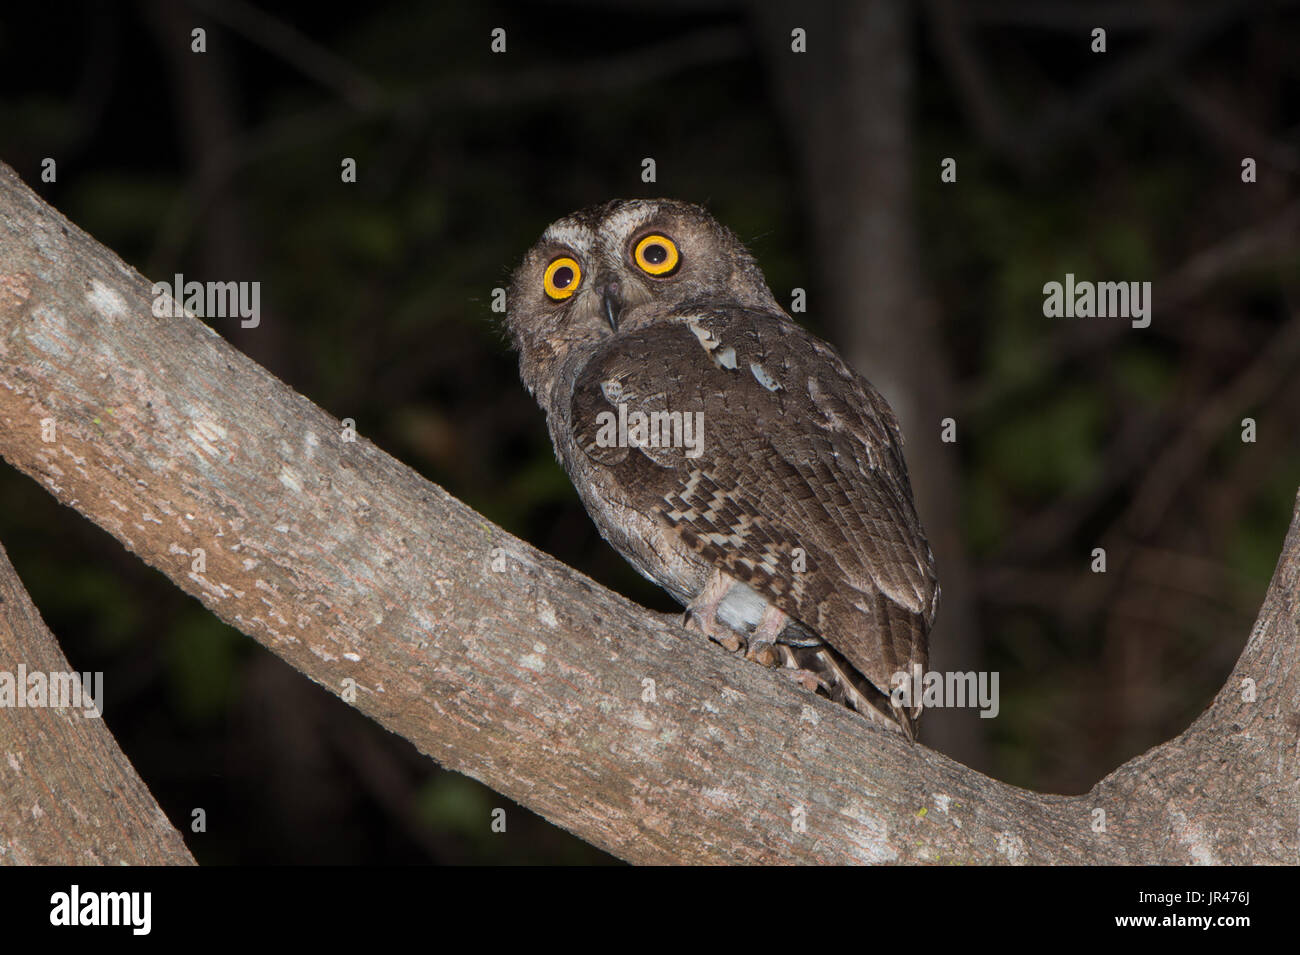 A Madagascar Scops Owl (Otus rutilus) hunting in a forest at night Stock Photo